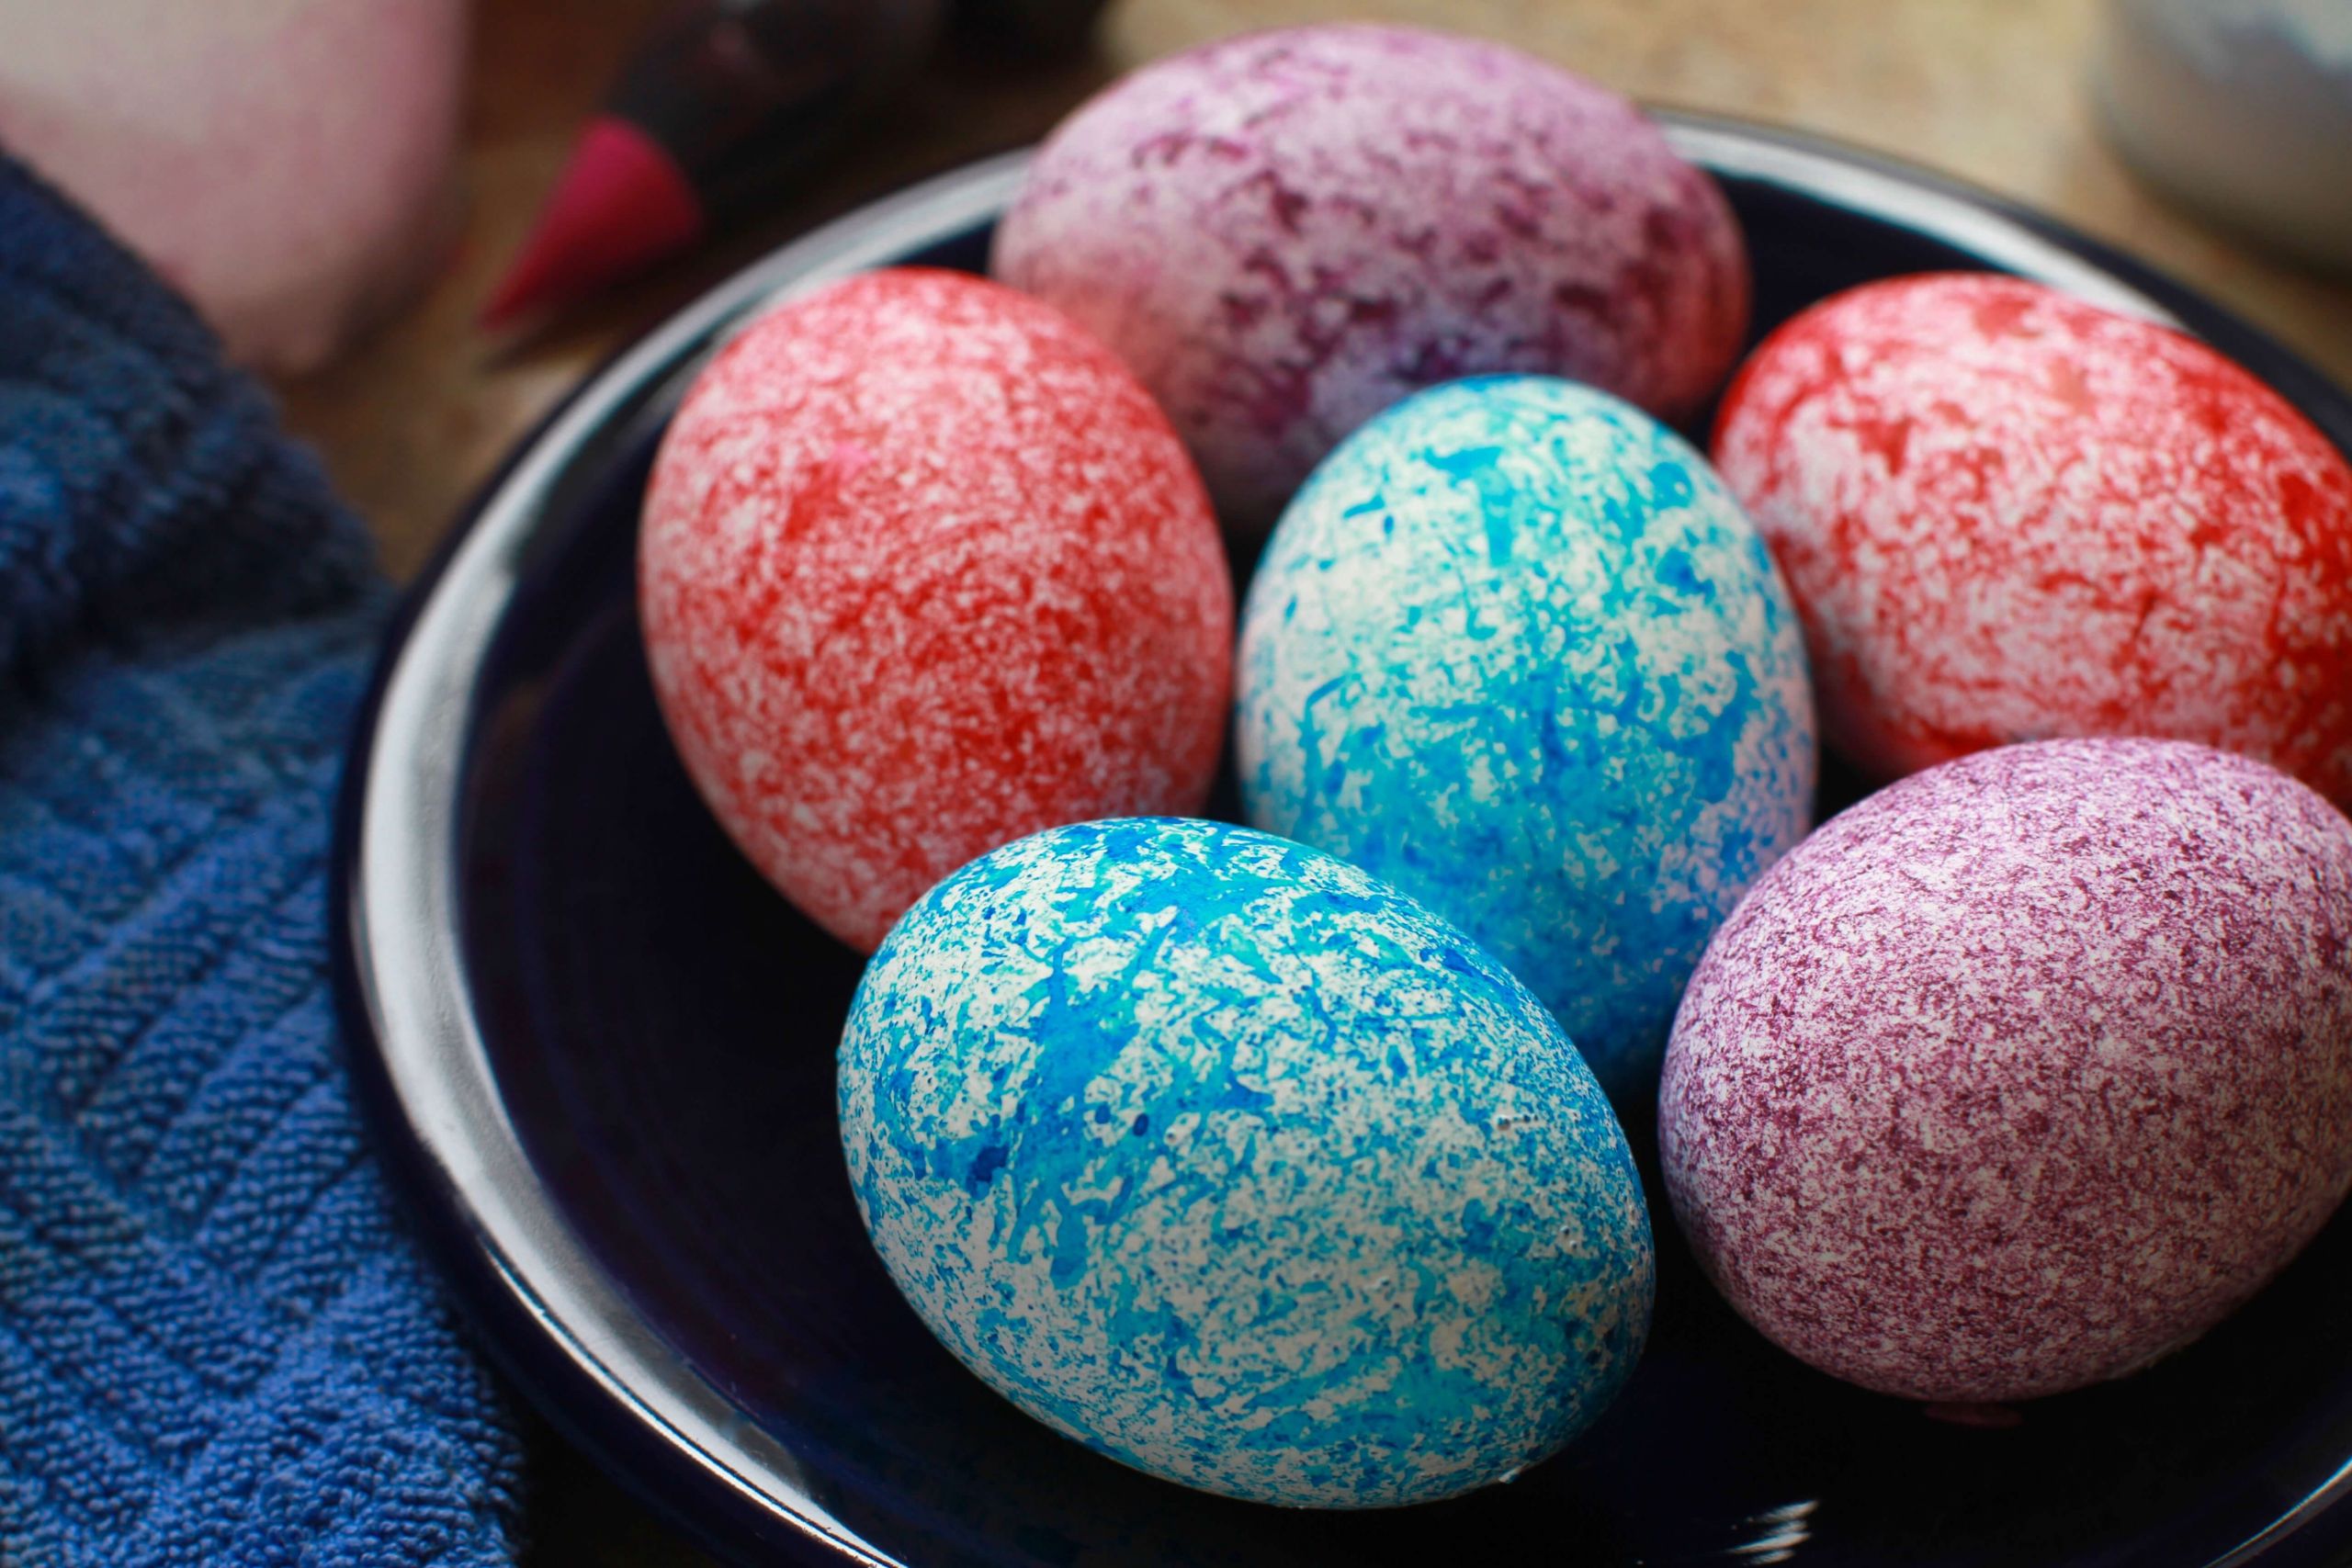 Coloring Easter Eggs With Food Coloring
 Dye speckled Easter eggs using rice this spring 1 dying